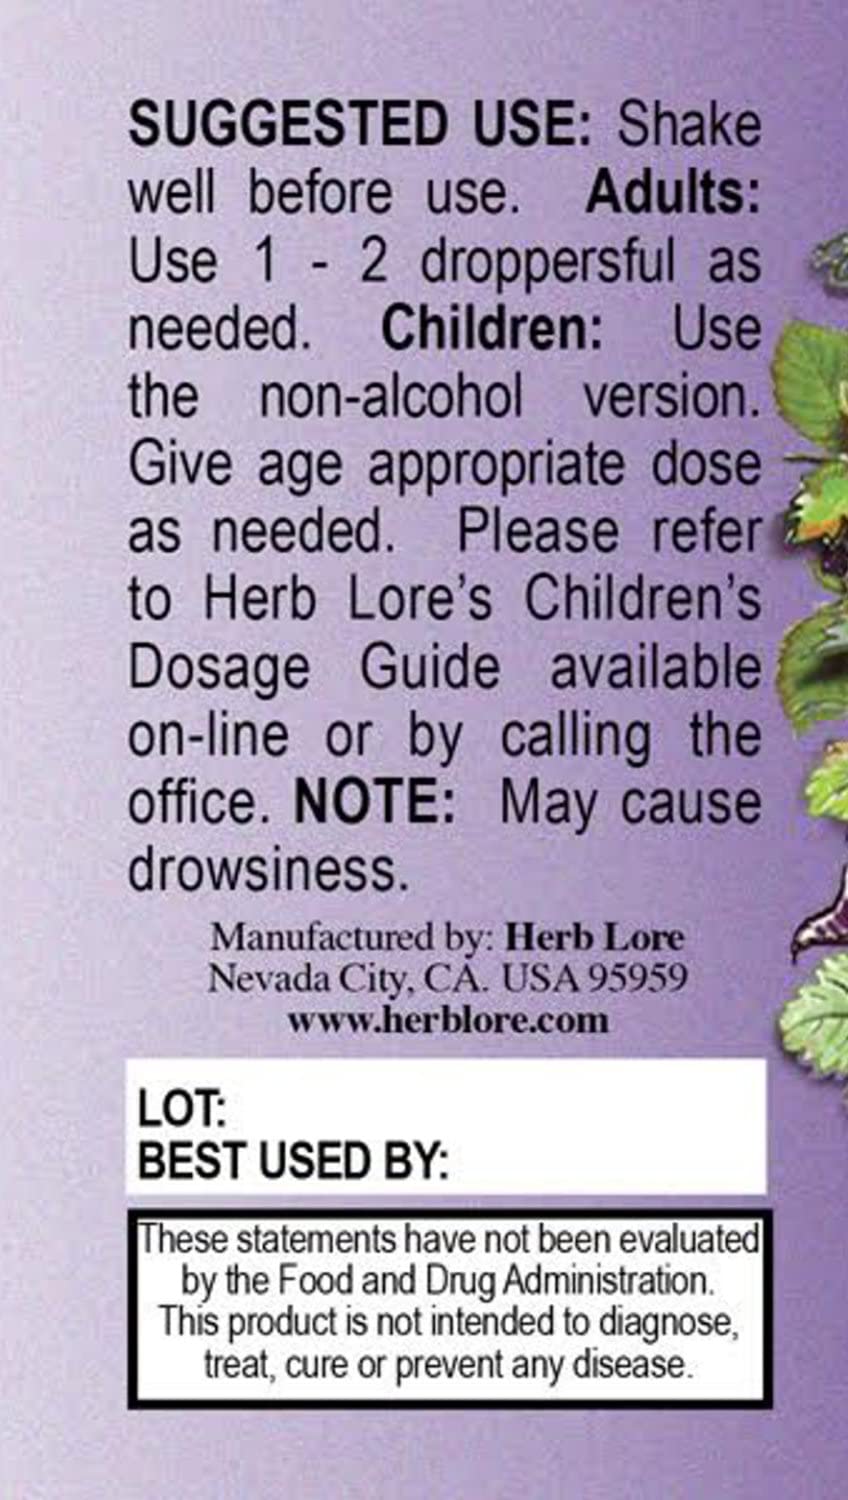 Herb Lore Relax Tincture 2 fl oz Non Alcohol - Liquid Drops with Lemon Balm, Chamomile & Skullcap to Calm, Soothe & Relax The Body & Mind for Kids & Adults